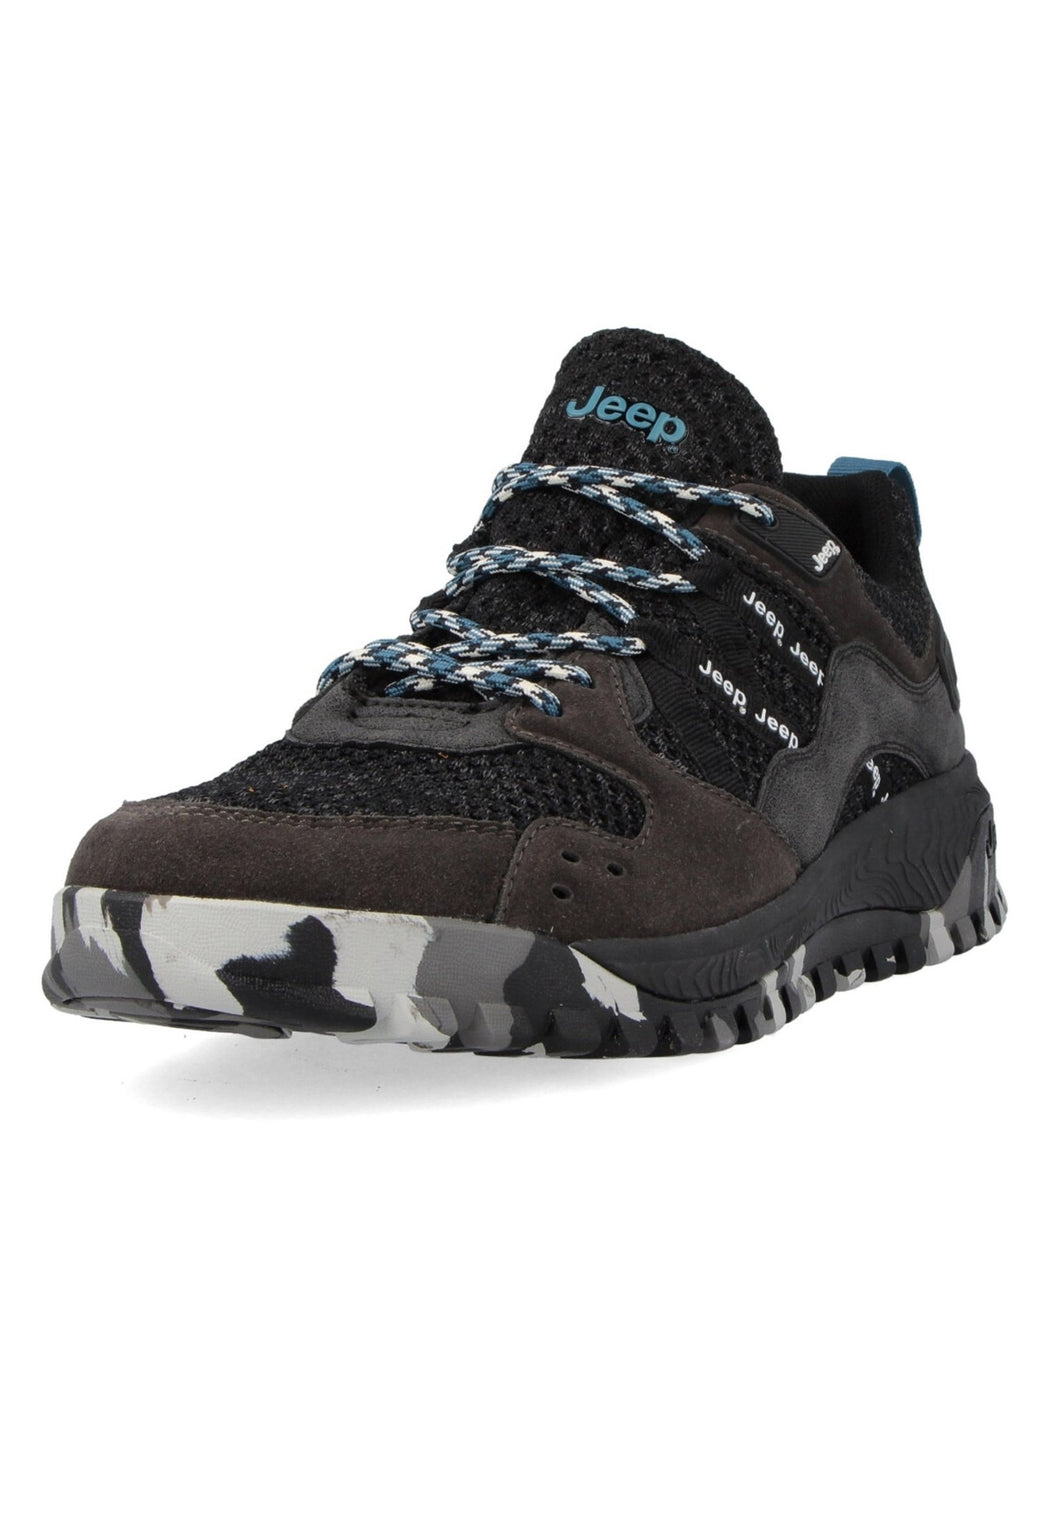 JEEP <BR>
Men's Canyon Trainers <BR>
Black <BR>